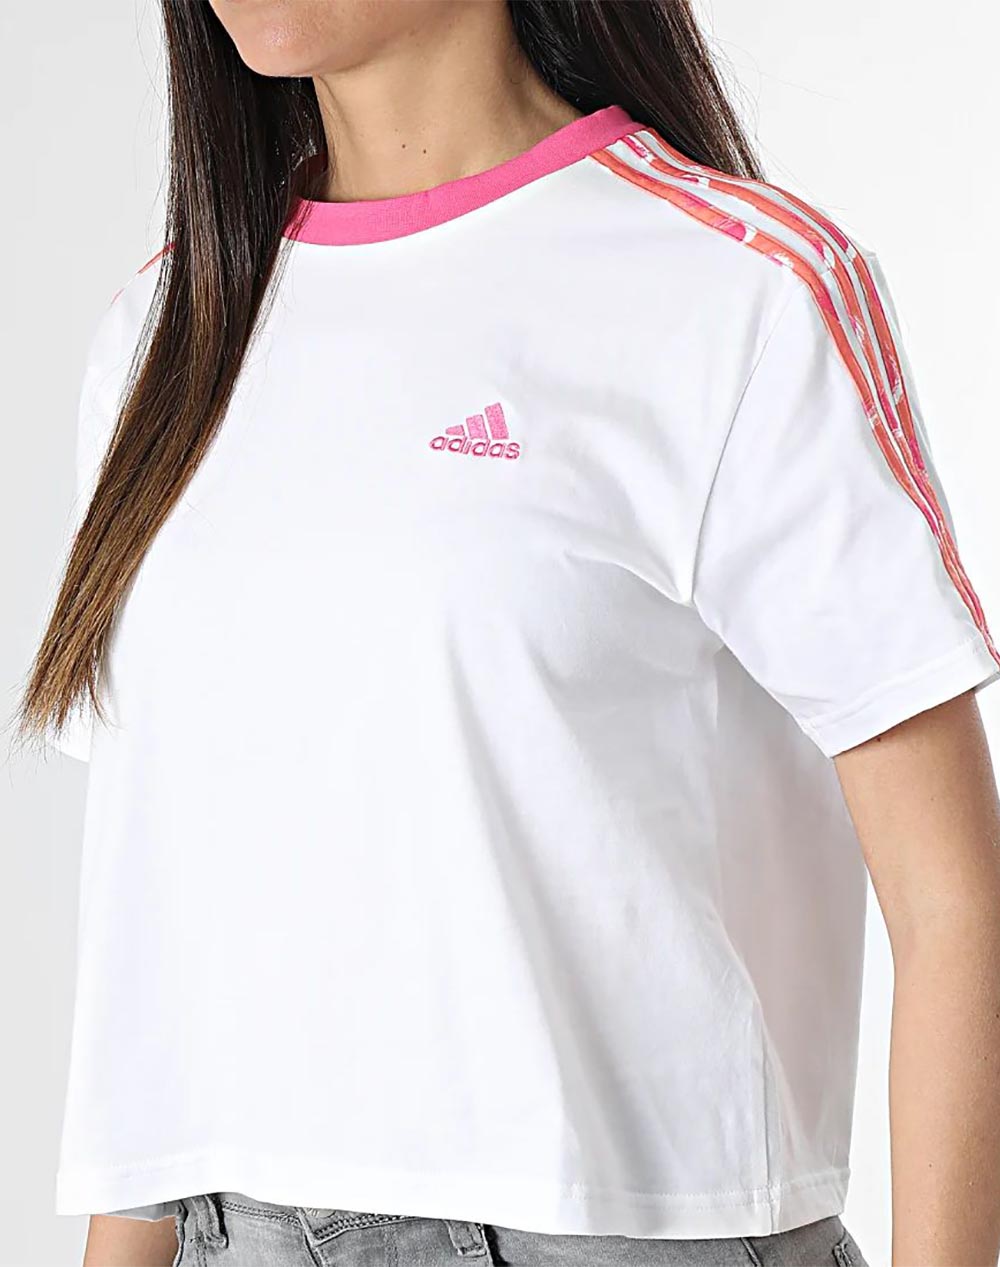 ADIDAS TOP W - CR 3S White TOP